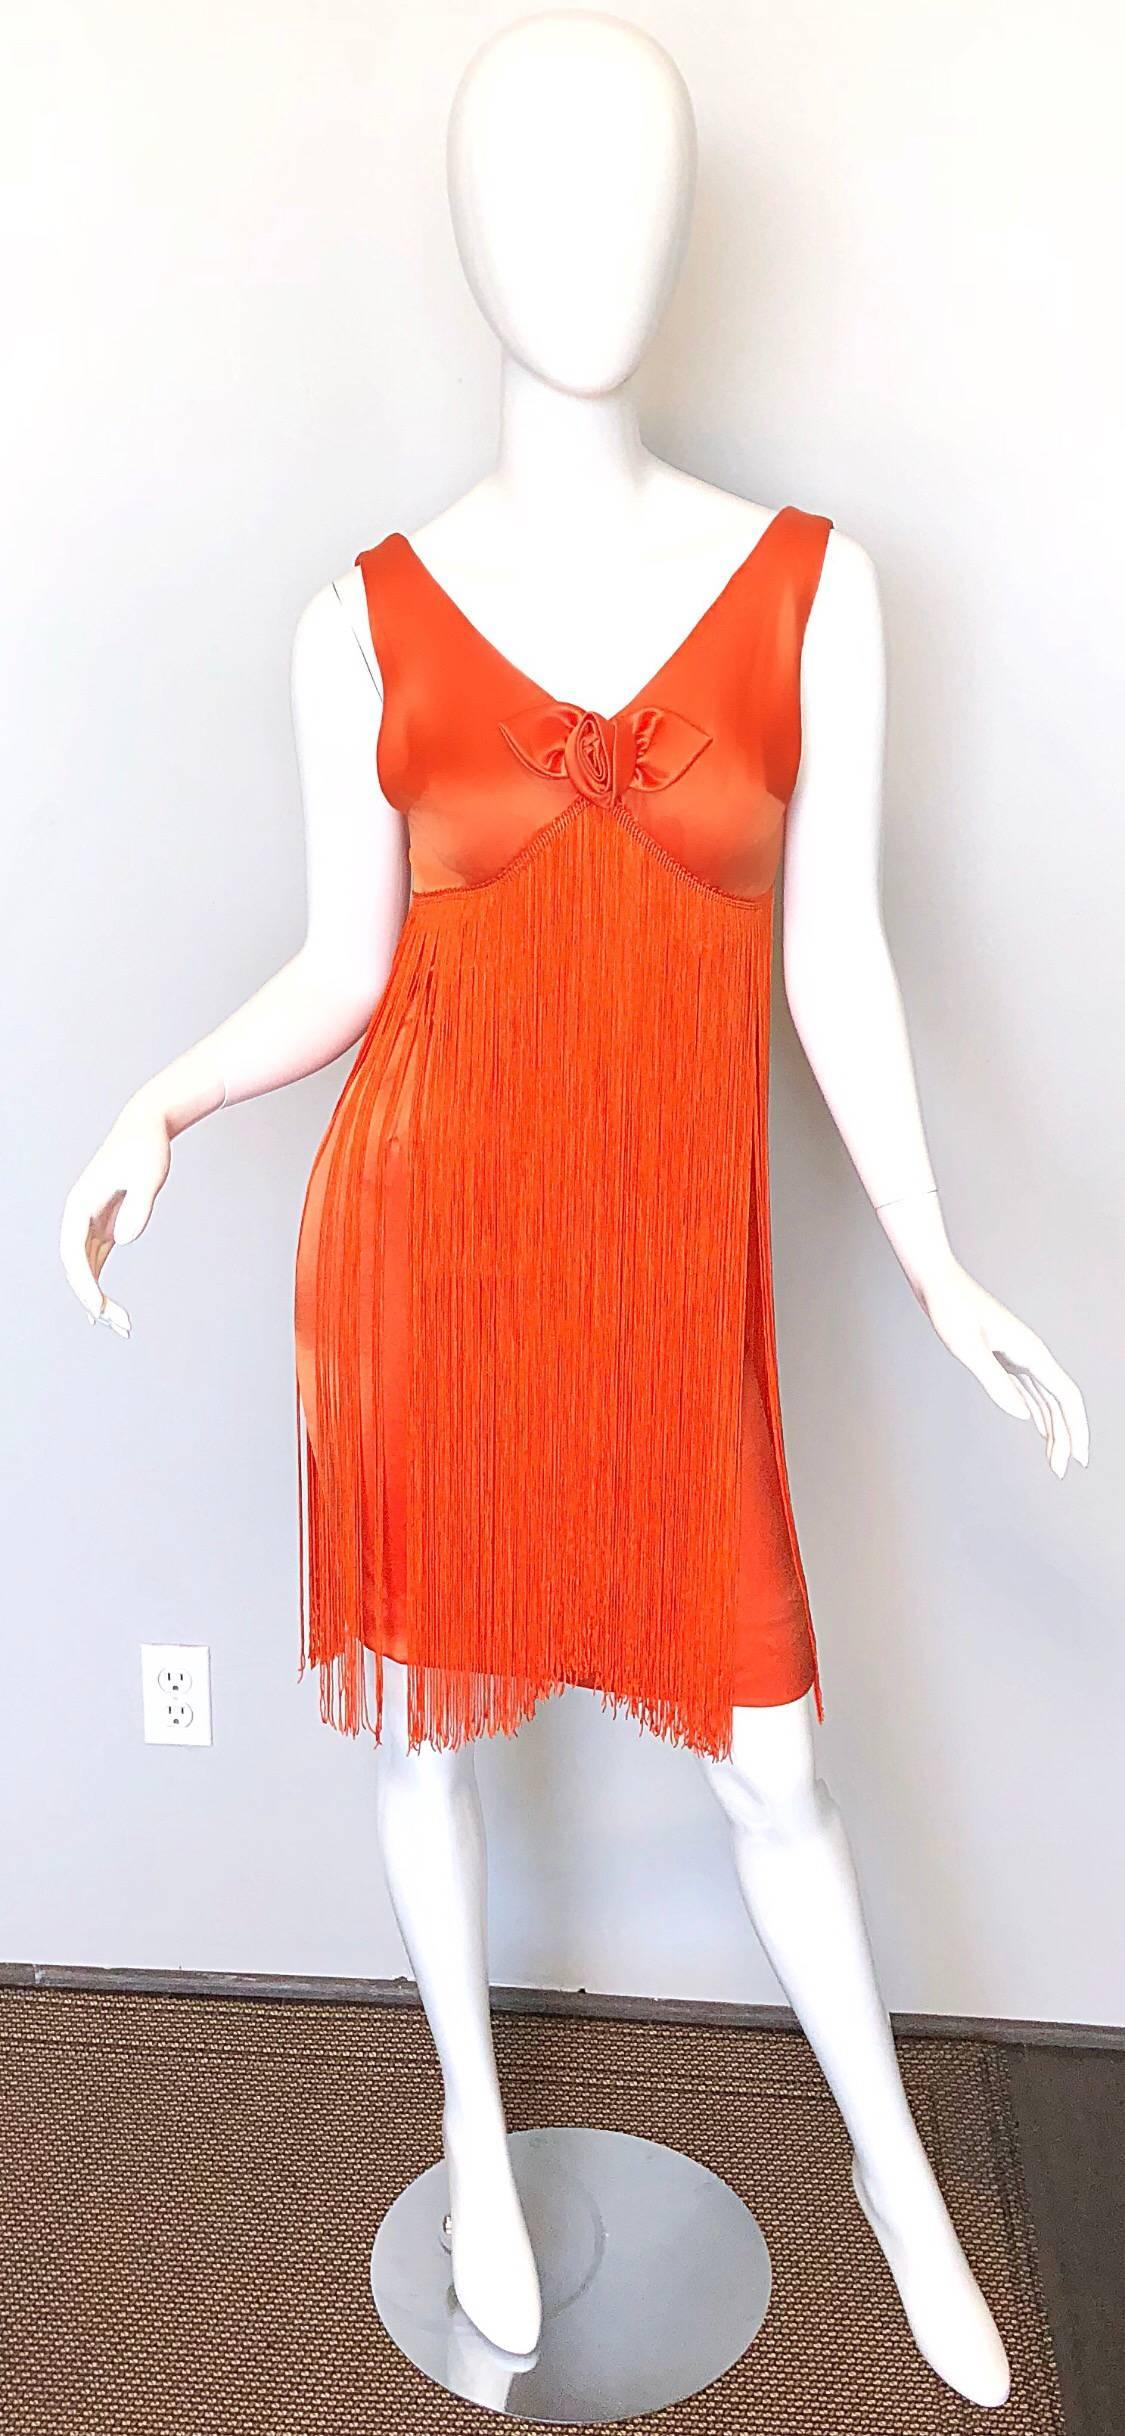 Amazing 1960s JOSEPH MAGNIN bright neon orange fully fringed dress! Features a bright orange jersey, with hundreds of hand sewn strings of long fringe under the front and back bodice. Hidden metal zipper up the back with hook-and-eye closure. Soft